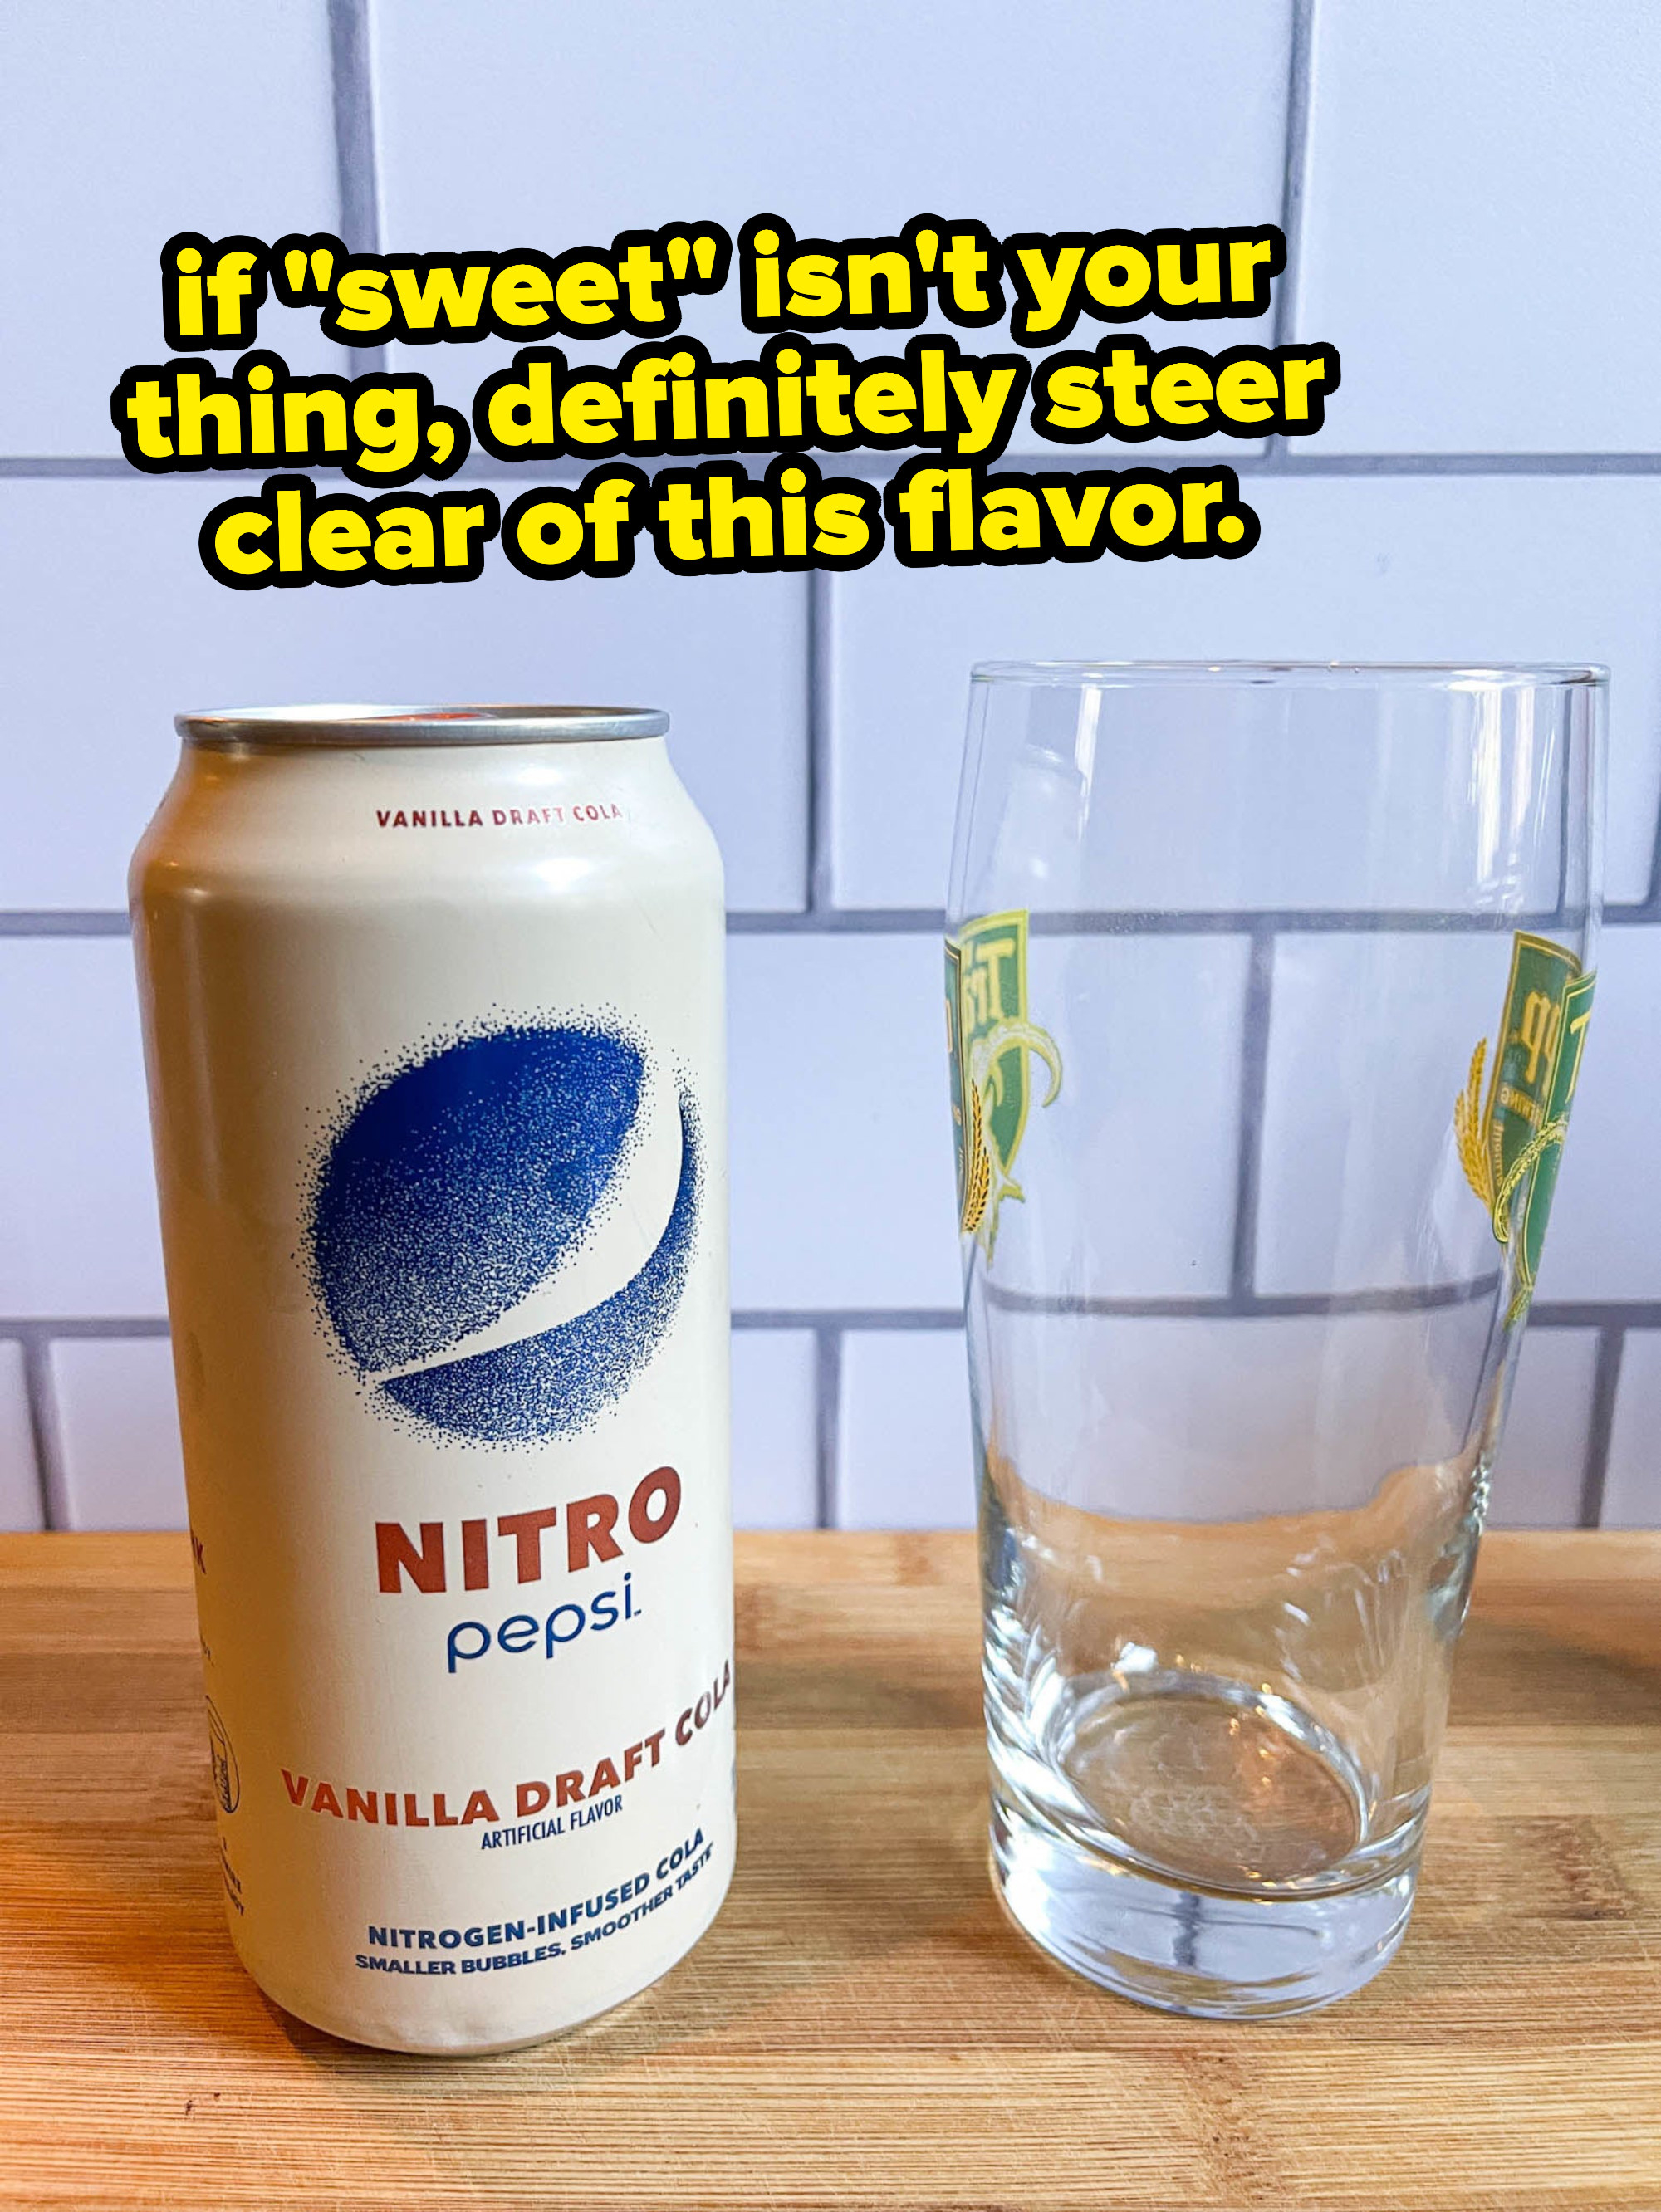 A can of Nitro Pepsi vanilla with text saying to steer clear of this flavor if &quot;sweet&quot; isn&#x27;t your thing